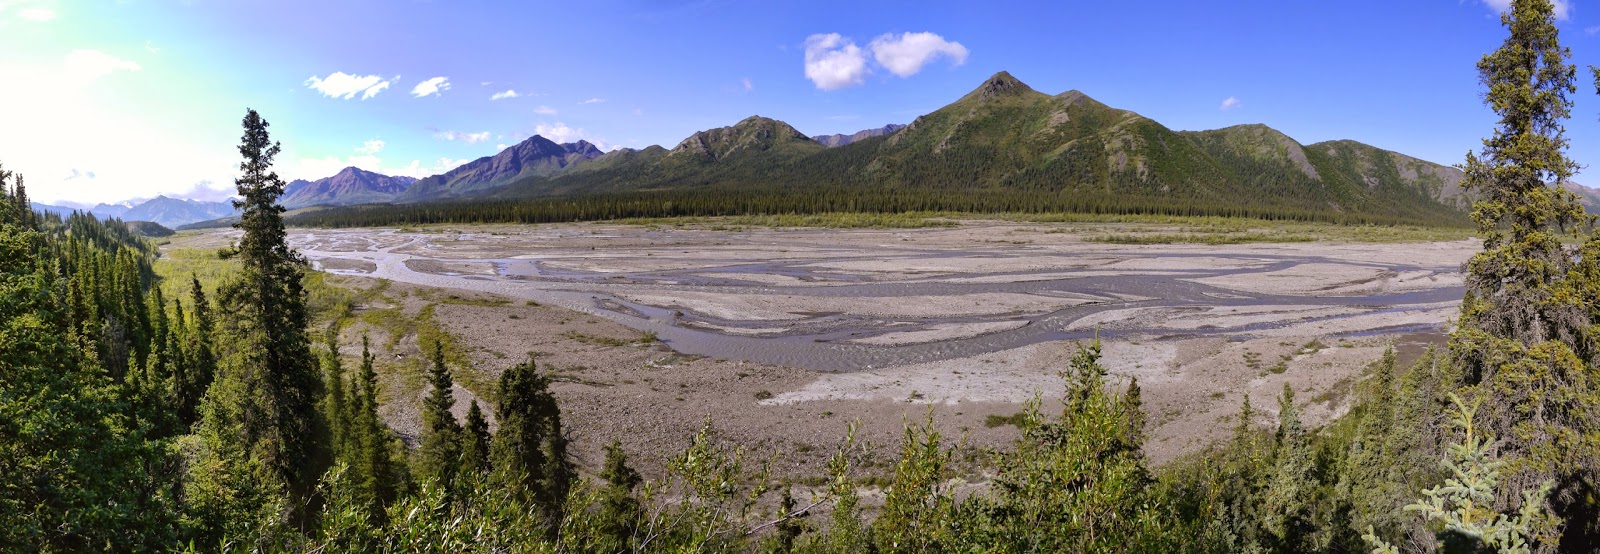 Braided channels of the Teklanika River in Denali National Park.